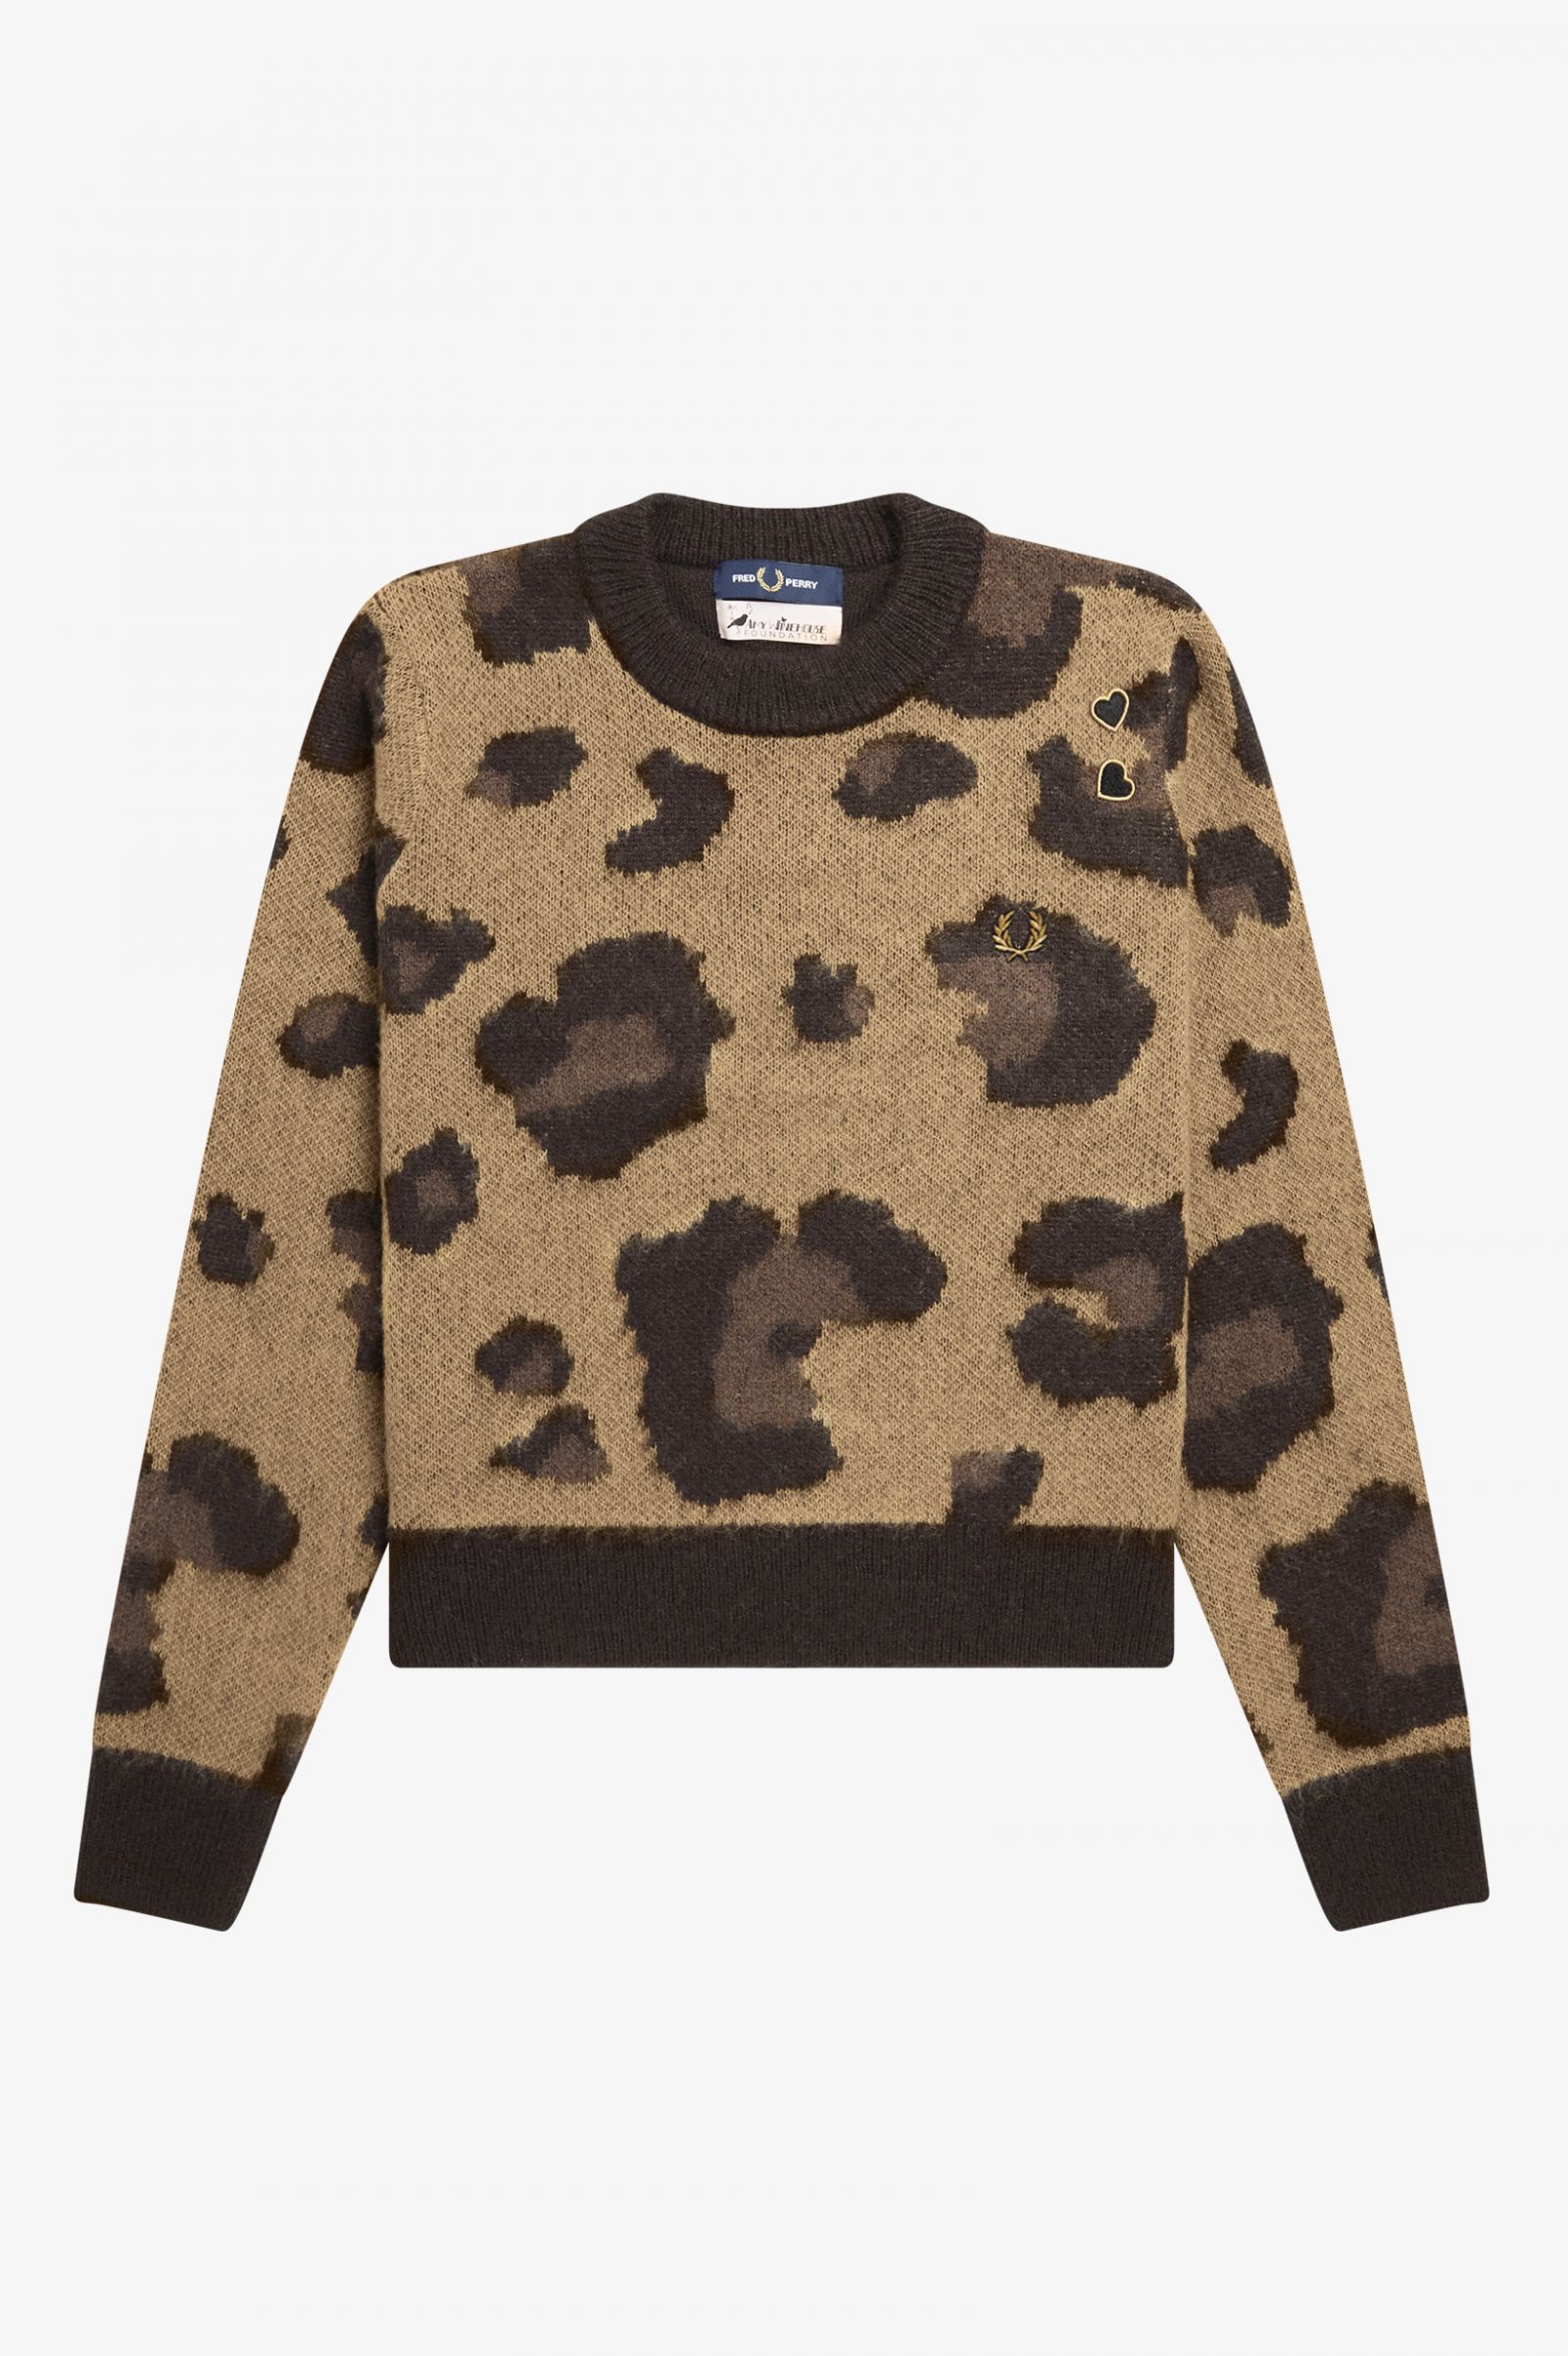 Fred Perry X Amy Winehouse Leopard Jumper